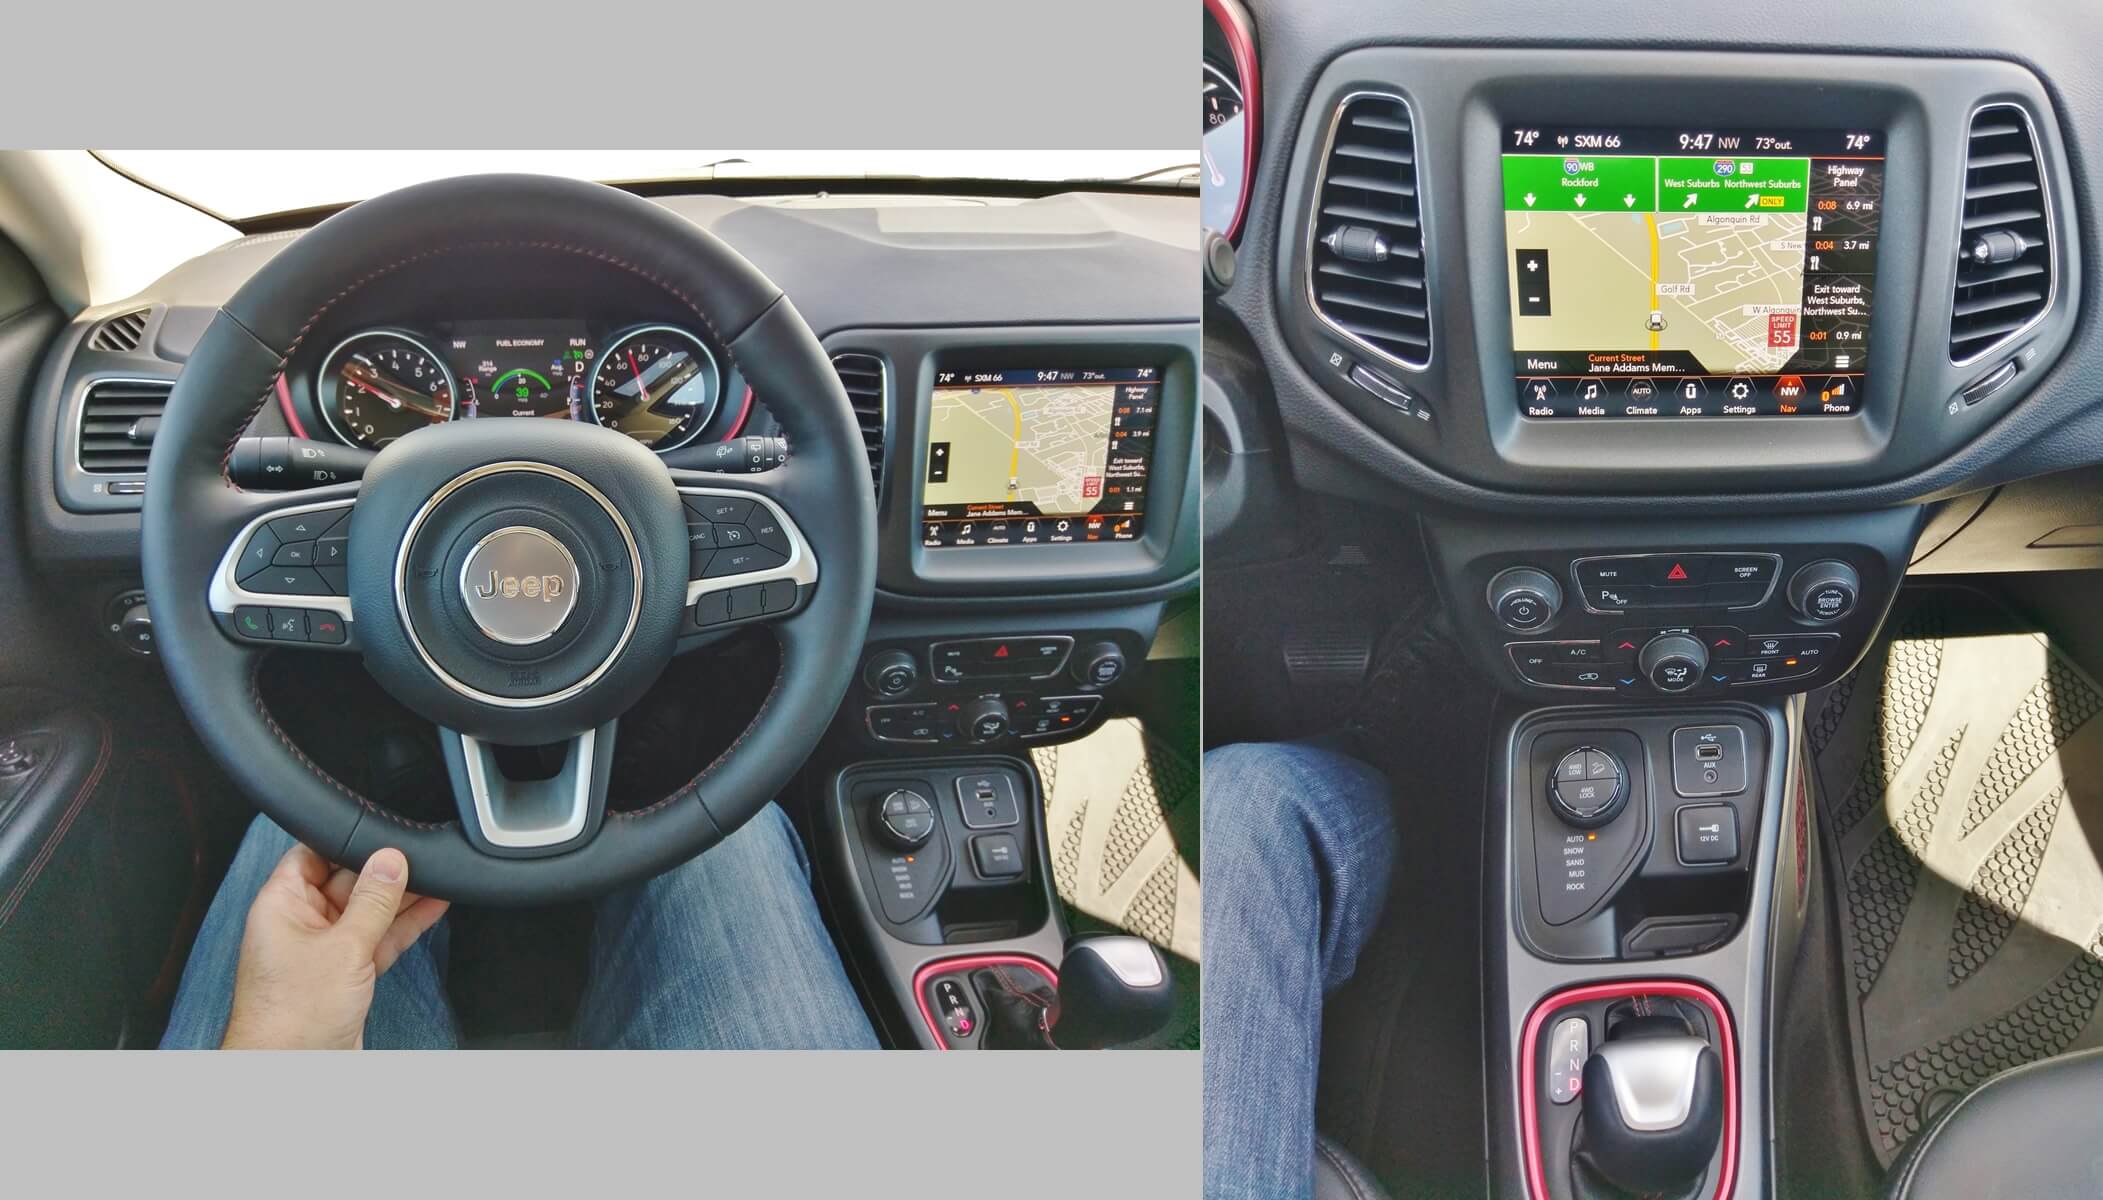 2017 Jeep Compass Trailhawk 4x4: Driver's view of instruments, including gauge cluster 7"-inch color TFT MFD and 8.4" UConnect LCD display w/ voice command, turn-by-turn Navigation